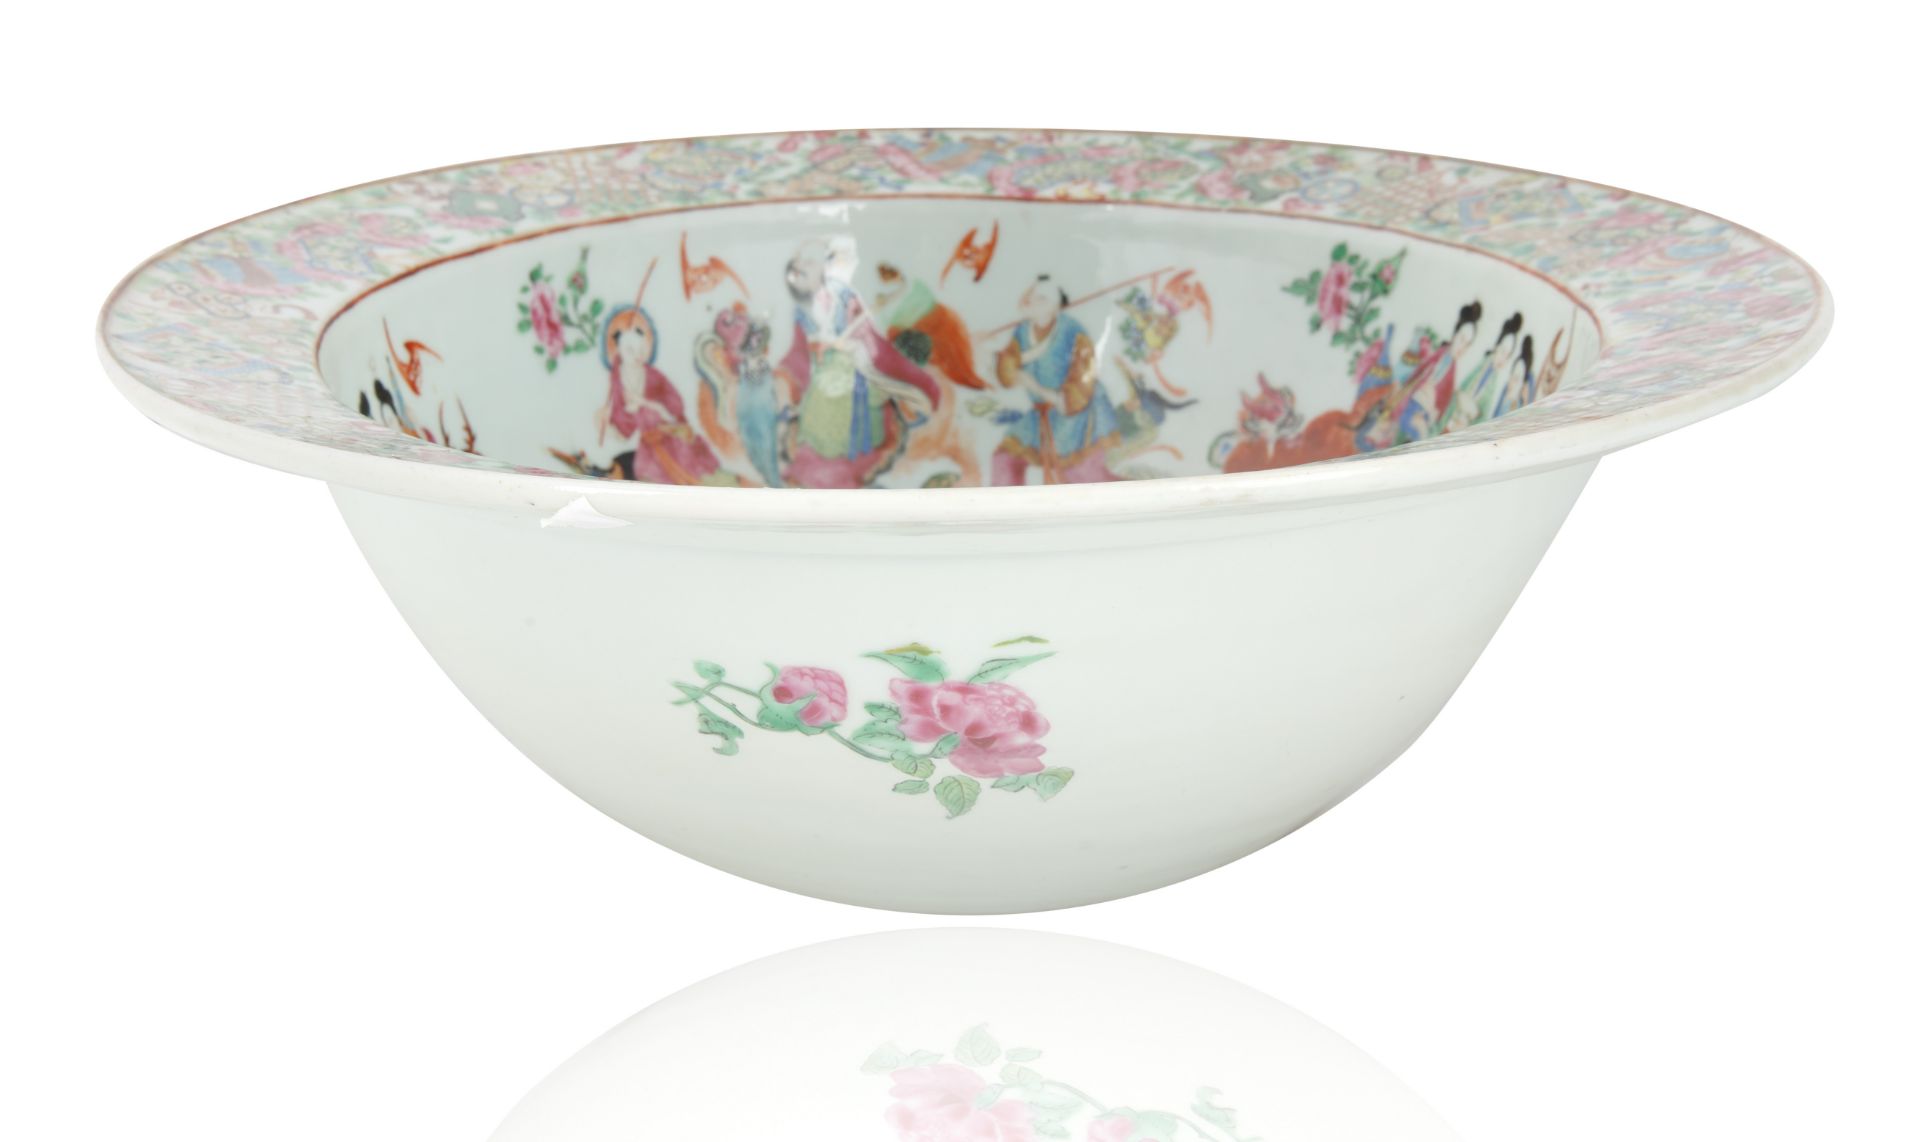 MID-19TH CENTURY LARGE FAMILLE ROSE PORCELAIN CANTON WARE PUNCH BOWL